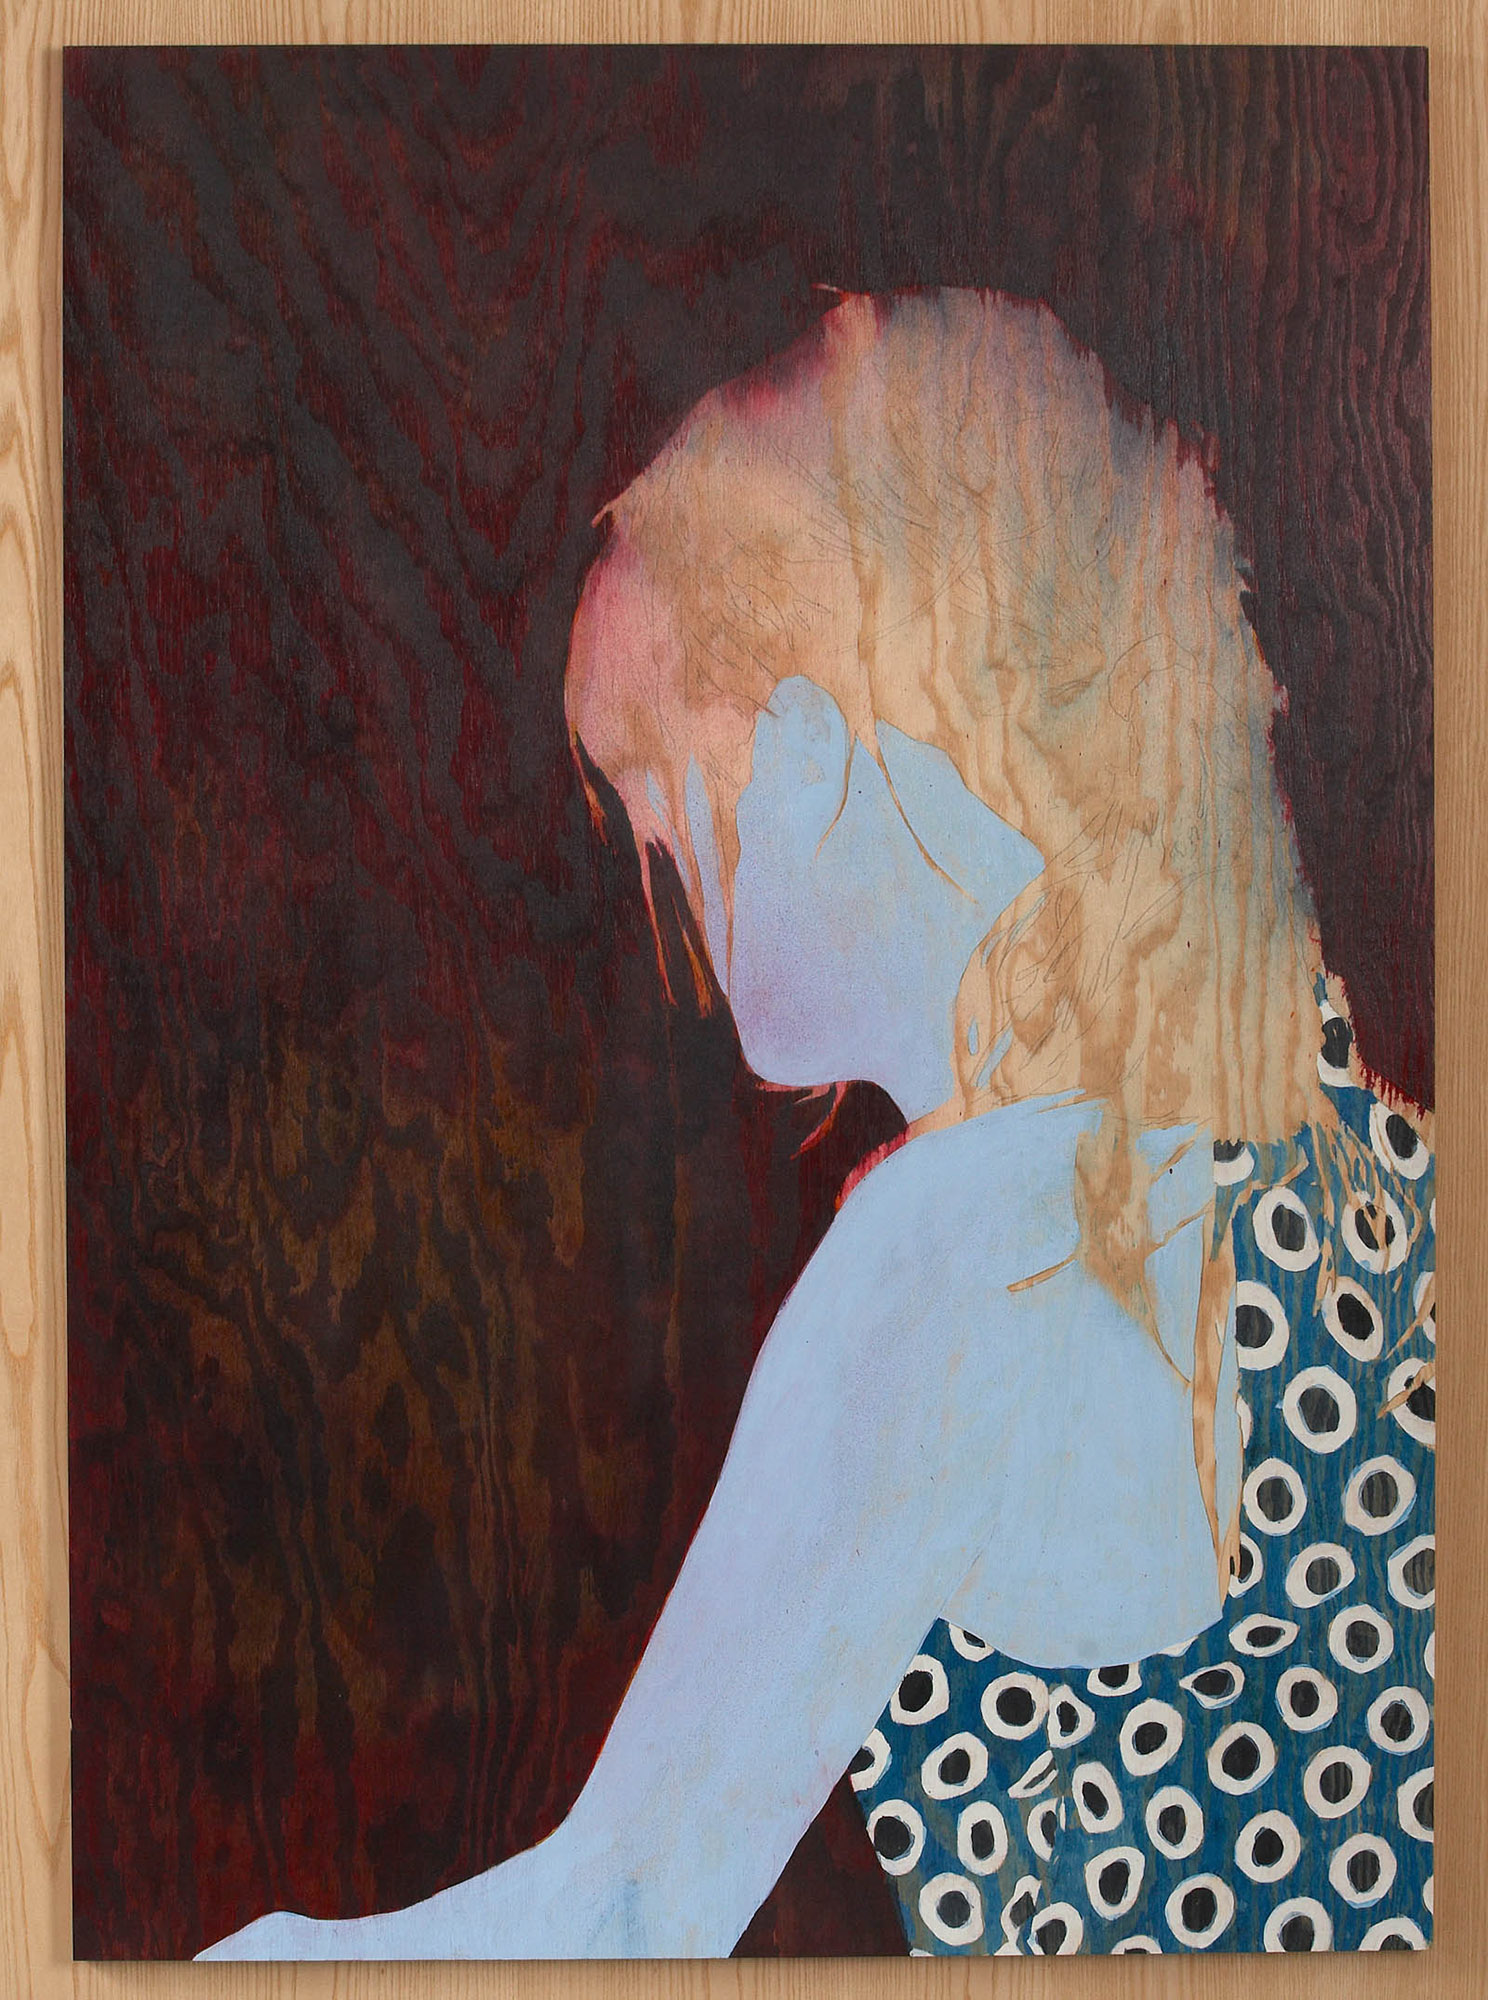 Painting of woman, turned away. She has blond hair and a spotted dress. Robert Lucander, 13 paintings.